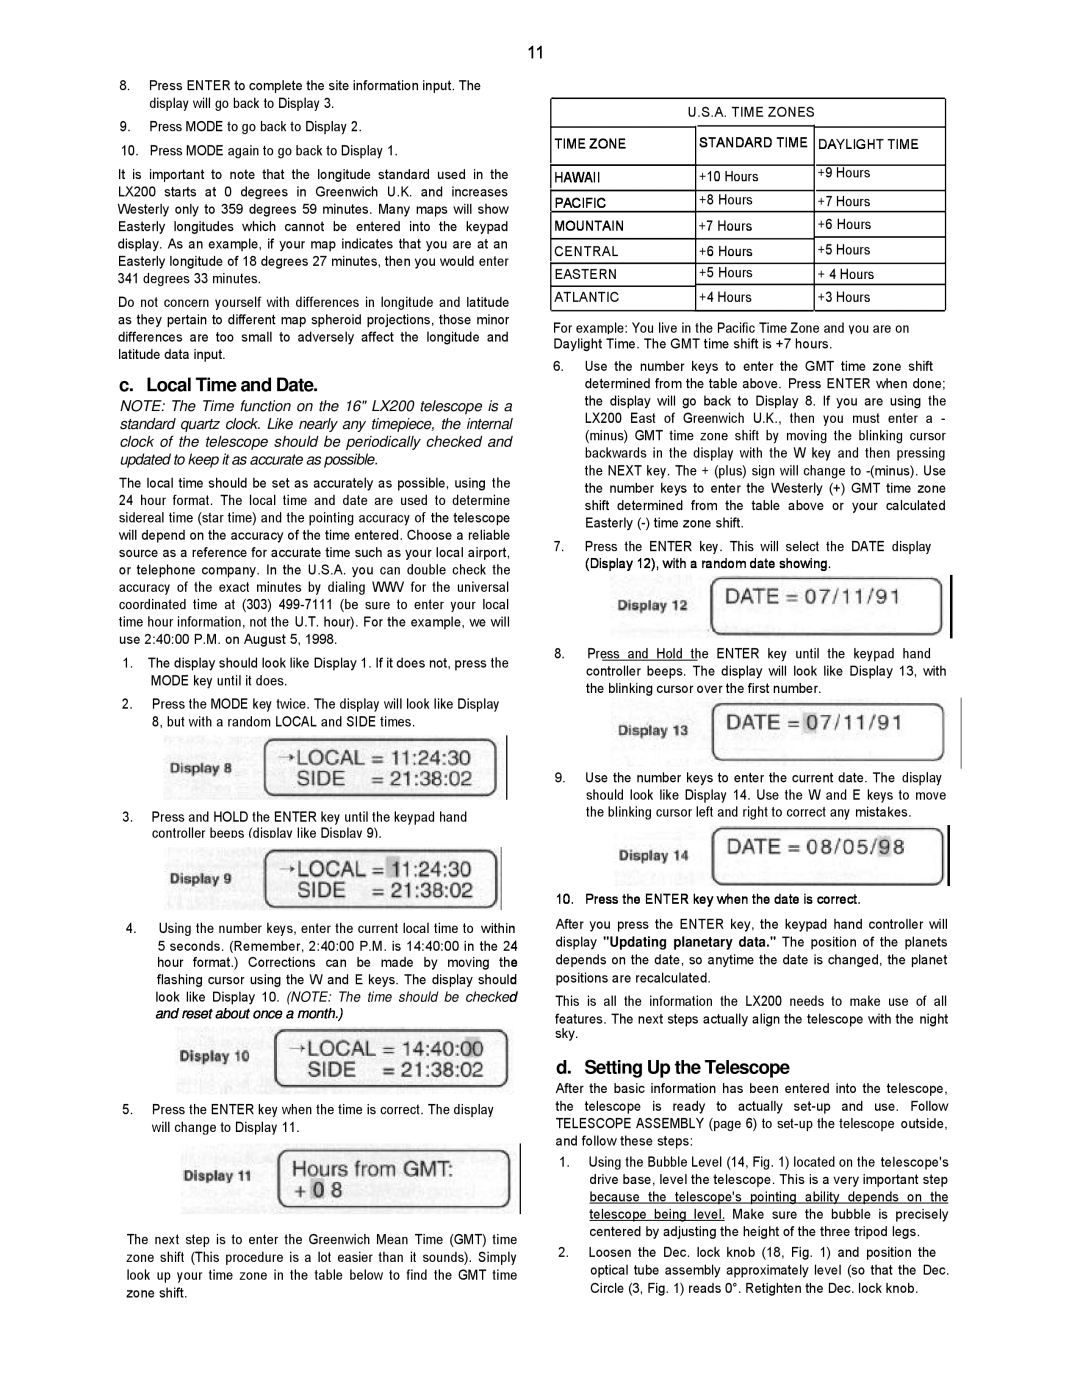 Leisure Time LX20 instruction manual c. Local Time and Date, d. Setting Up the Telescope 